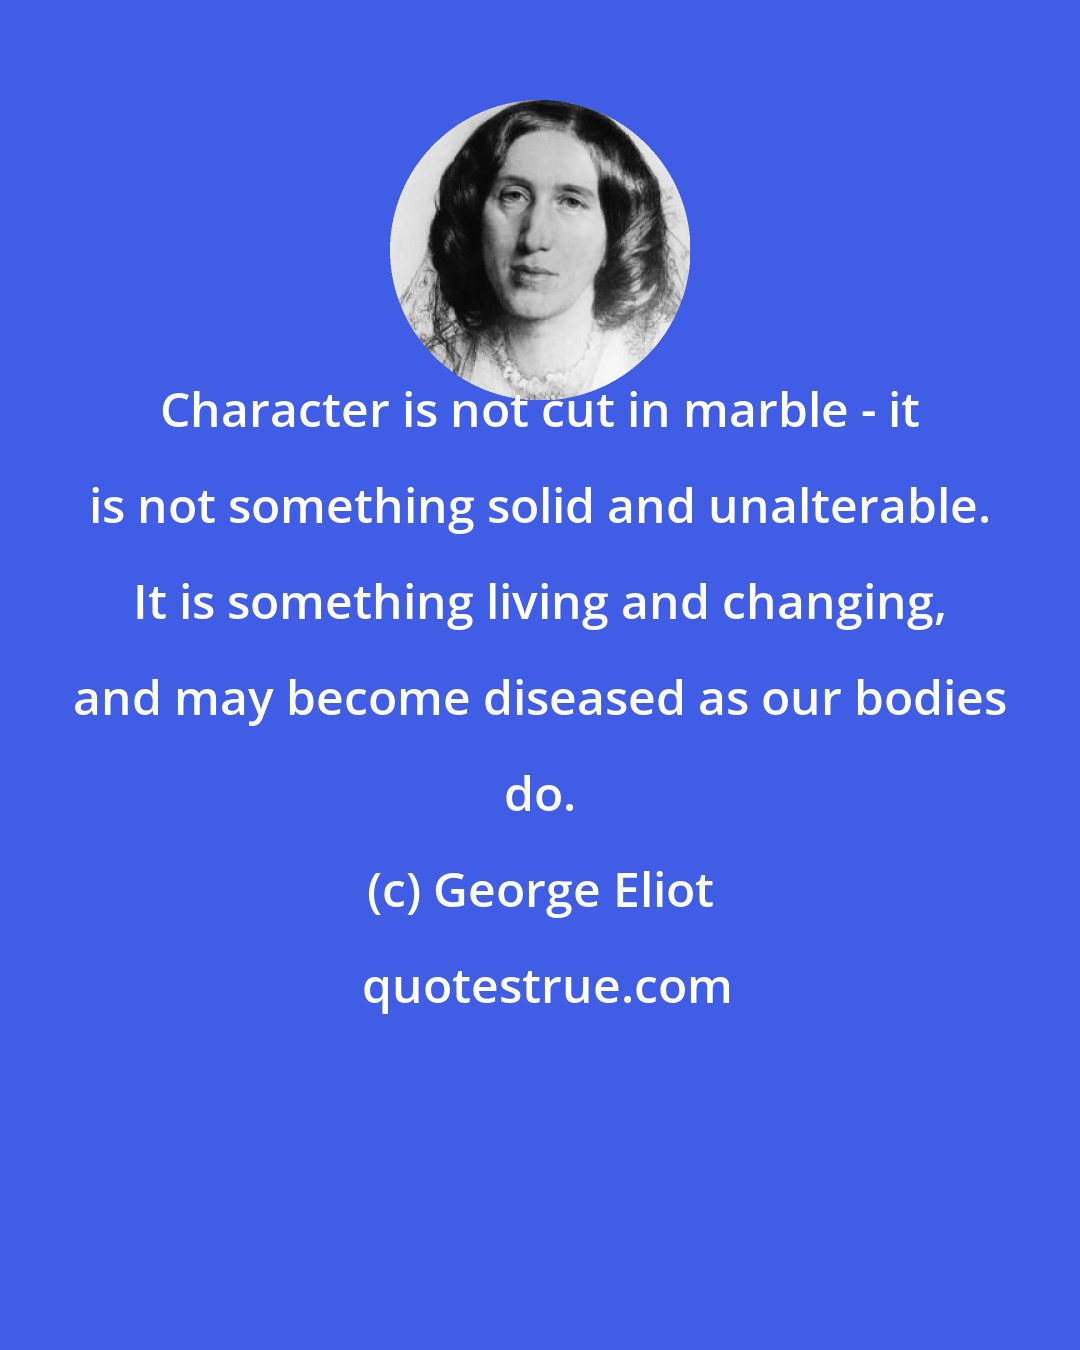 George Eliot: Character is not cut in marble - it is not something solid and unalterable. It is something living and changing, and may become diseased as our bodies do.